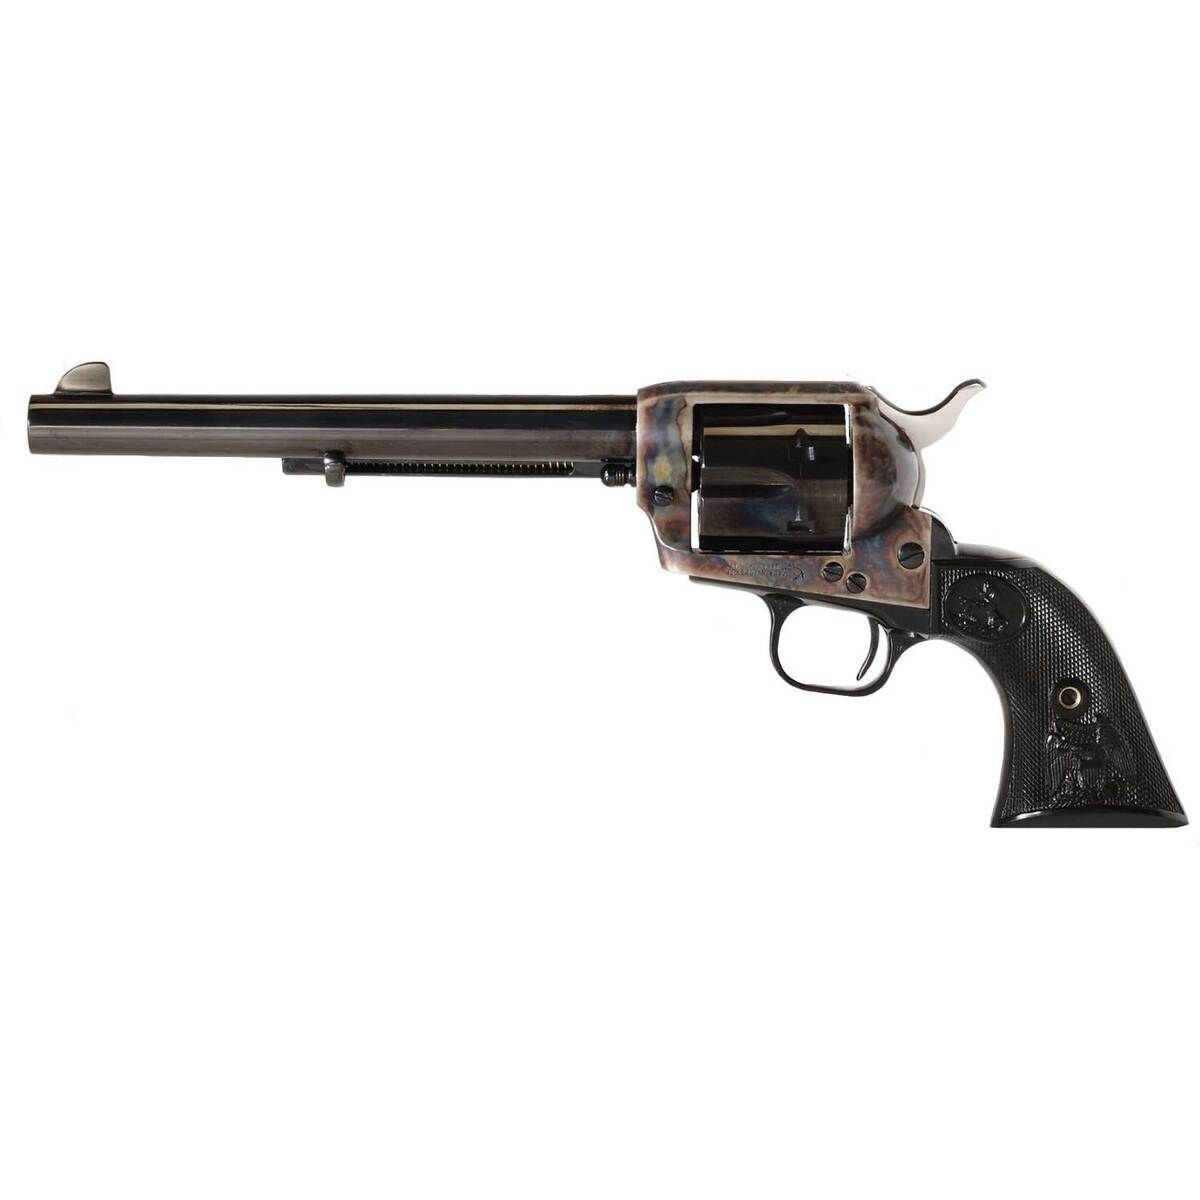 Buy Colt Single Action Army Peacemaker 357 Magnum 7.5in Blued Revolver - 6 Rounds Online